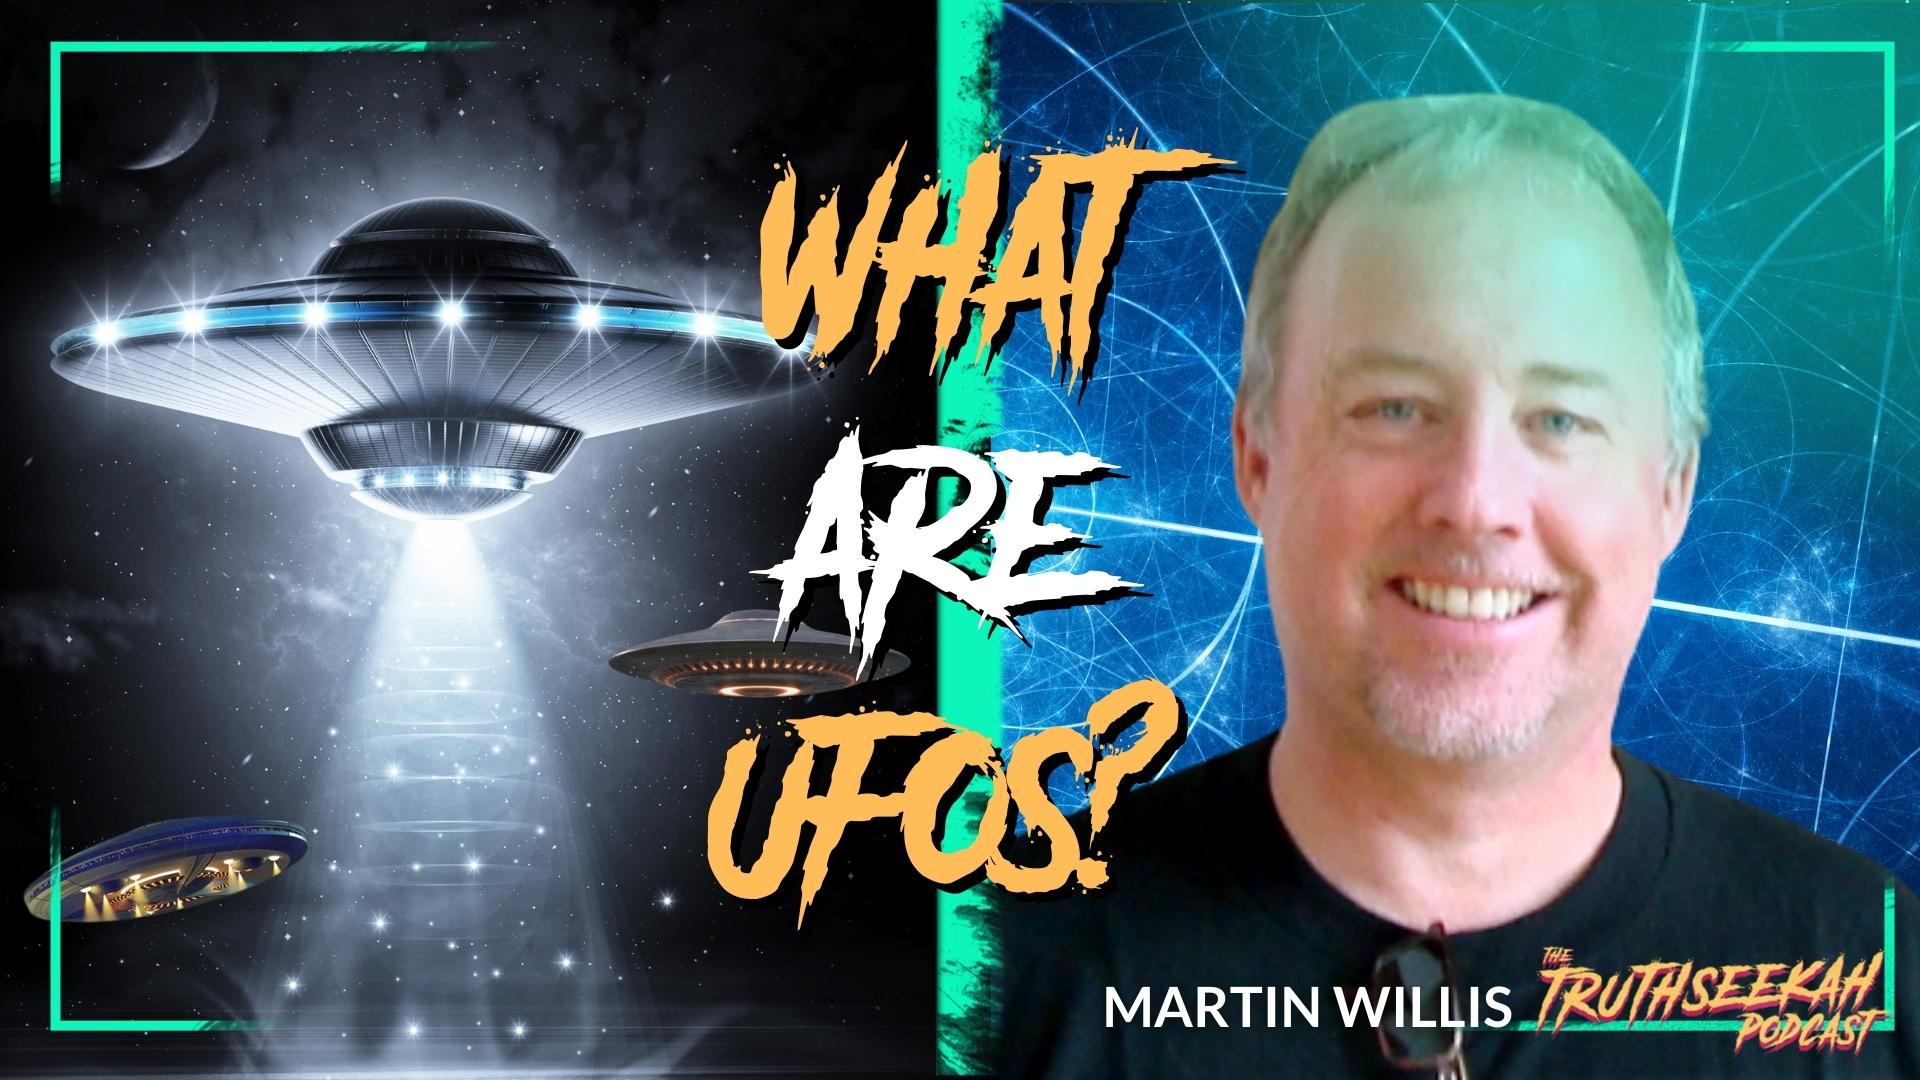 Martin Willis Interviewed Over 487 People About Their UFO and Alien Experiences and Research! – TruthSeekah Podcast